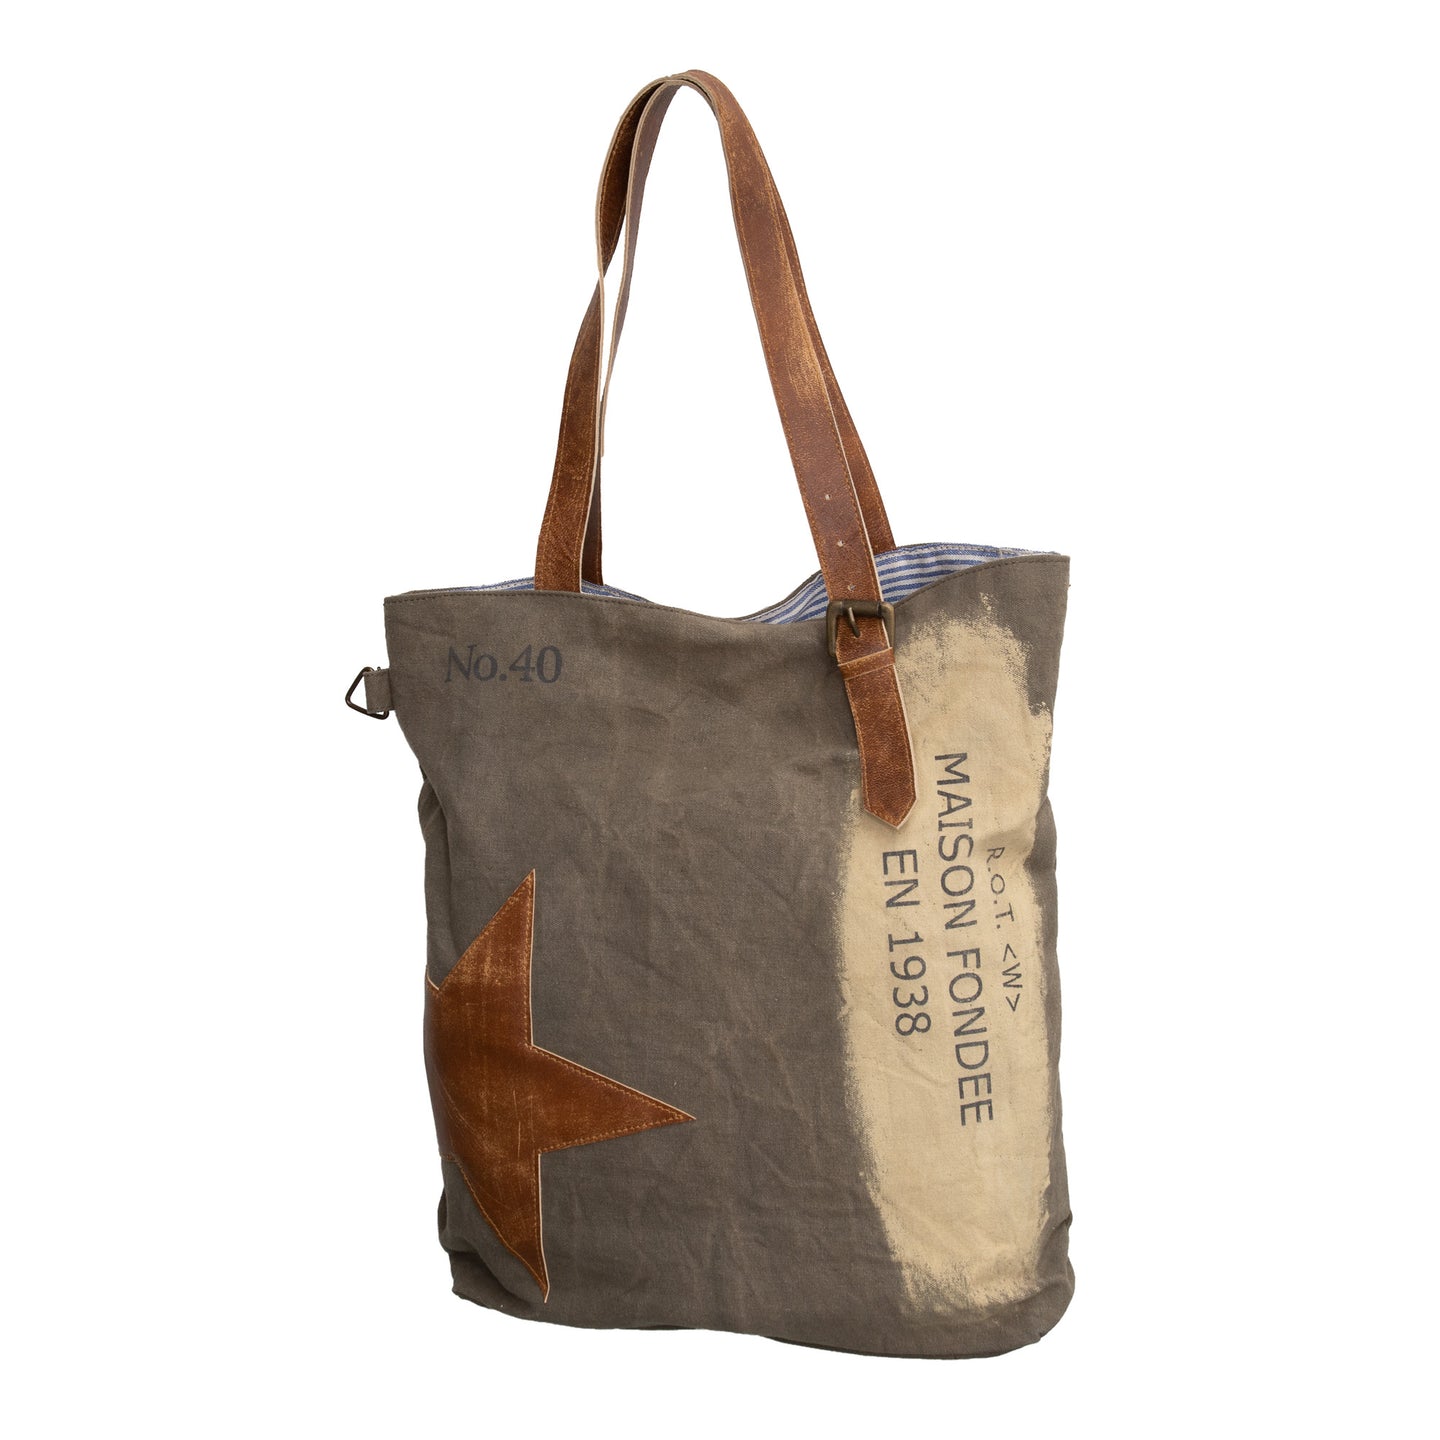 Vintage Grey French Shopper/Tote bag with leather star detail - Dorset Bay 001